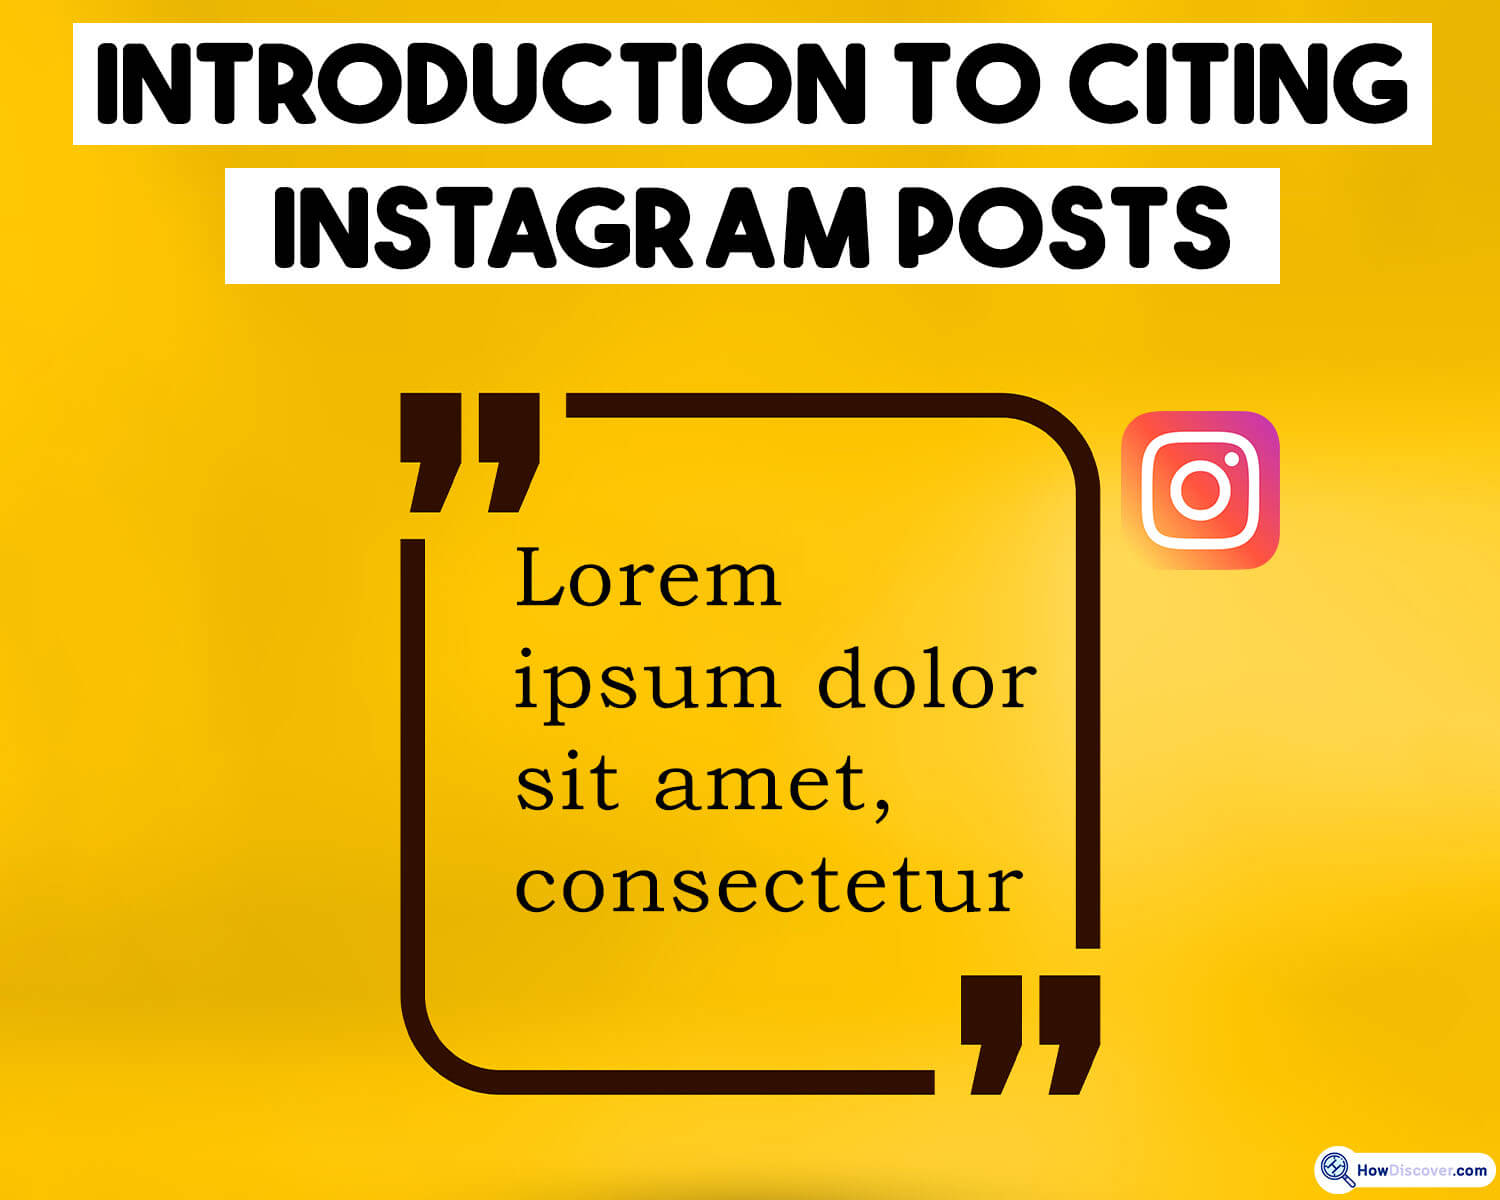 How To Cite An Instagram Post